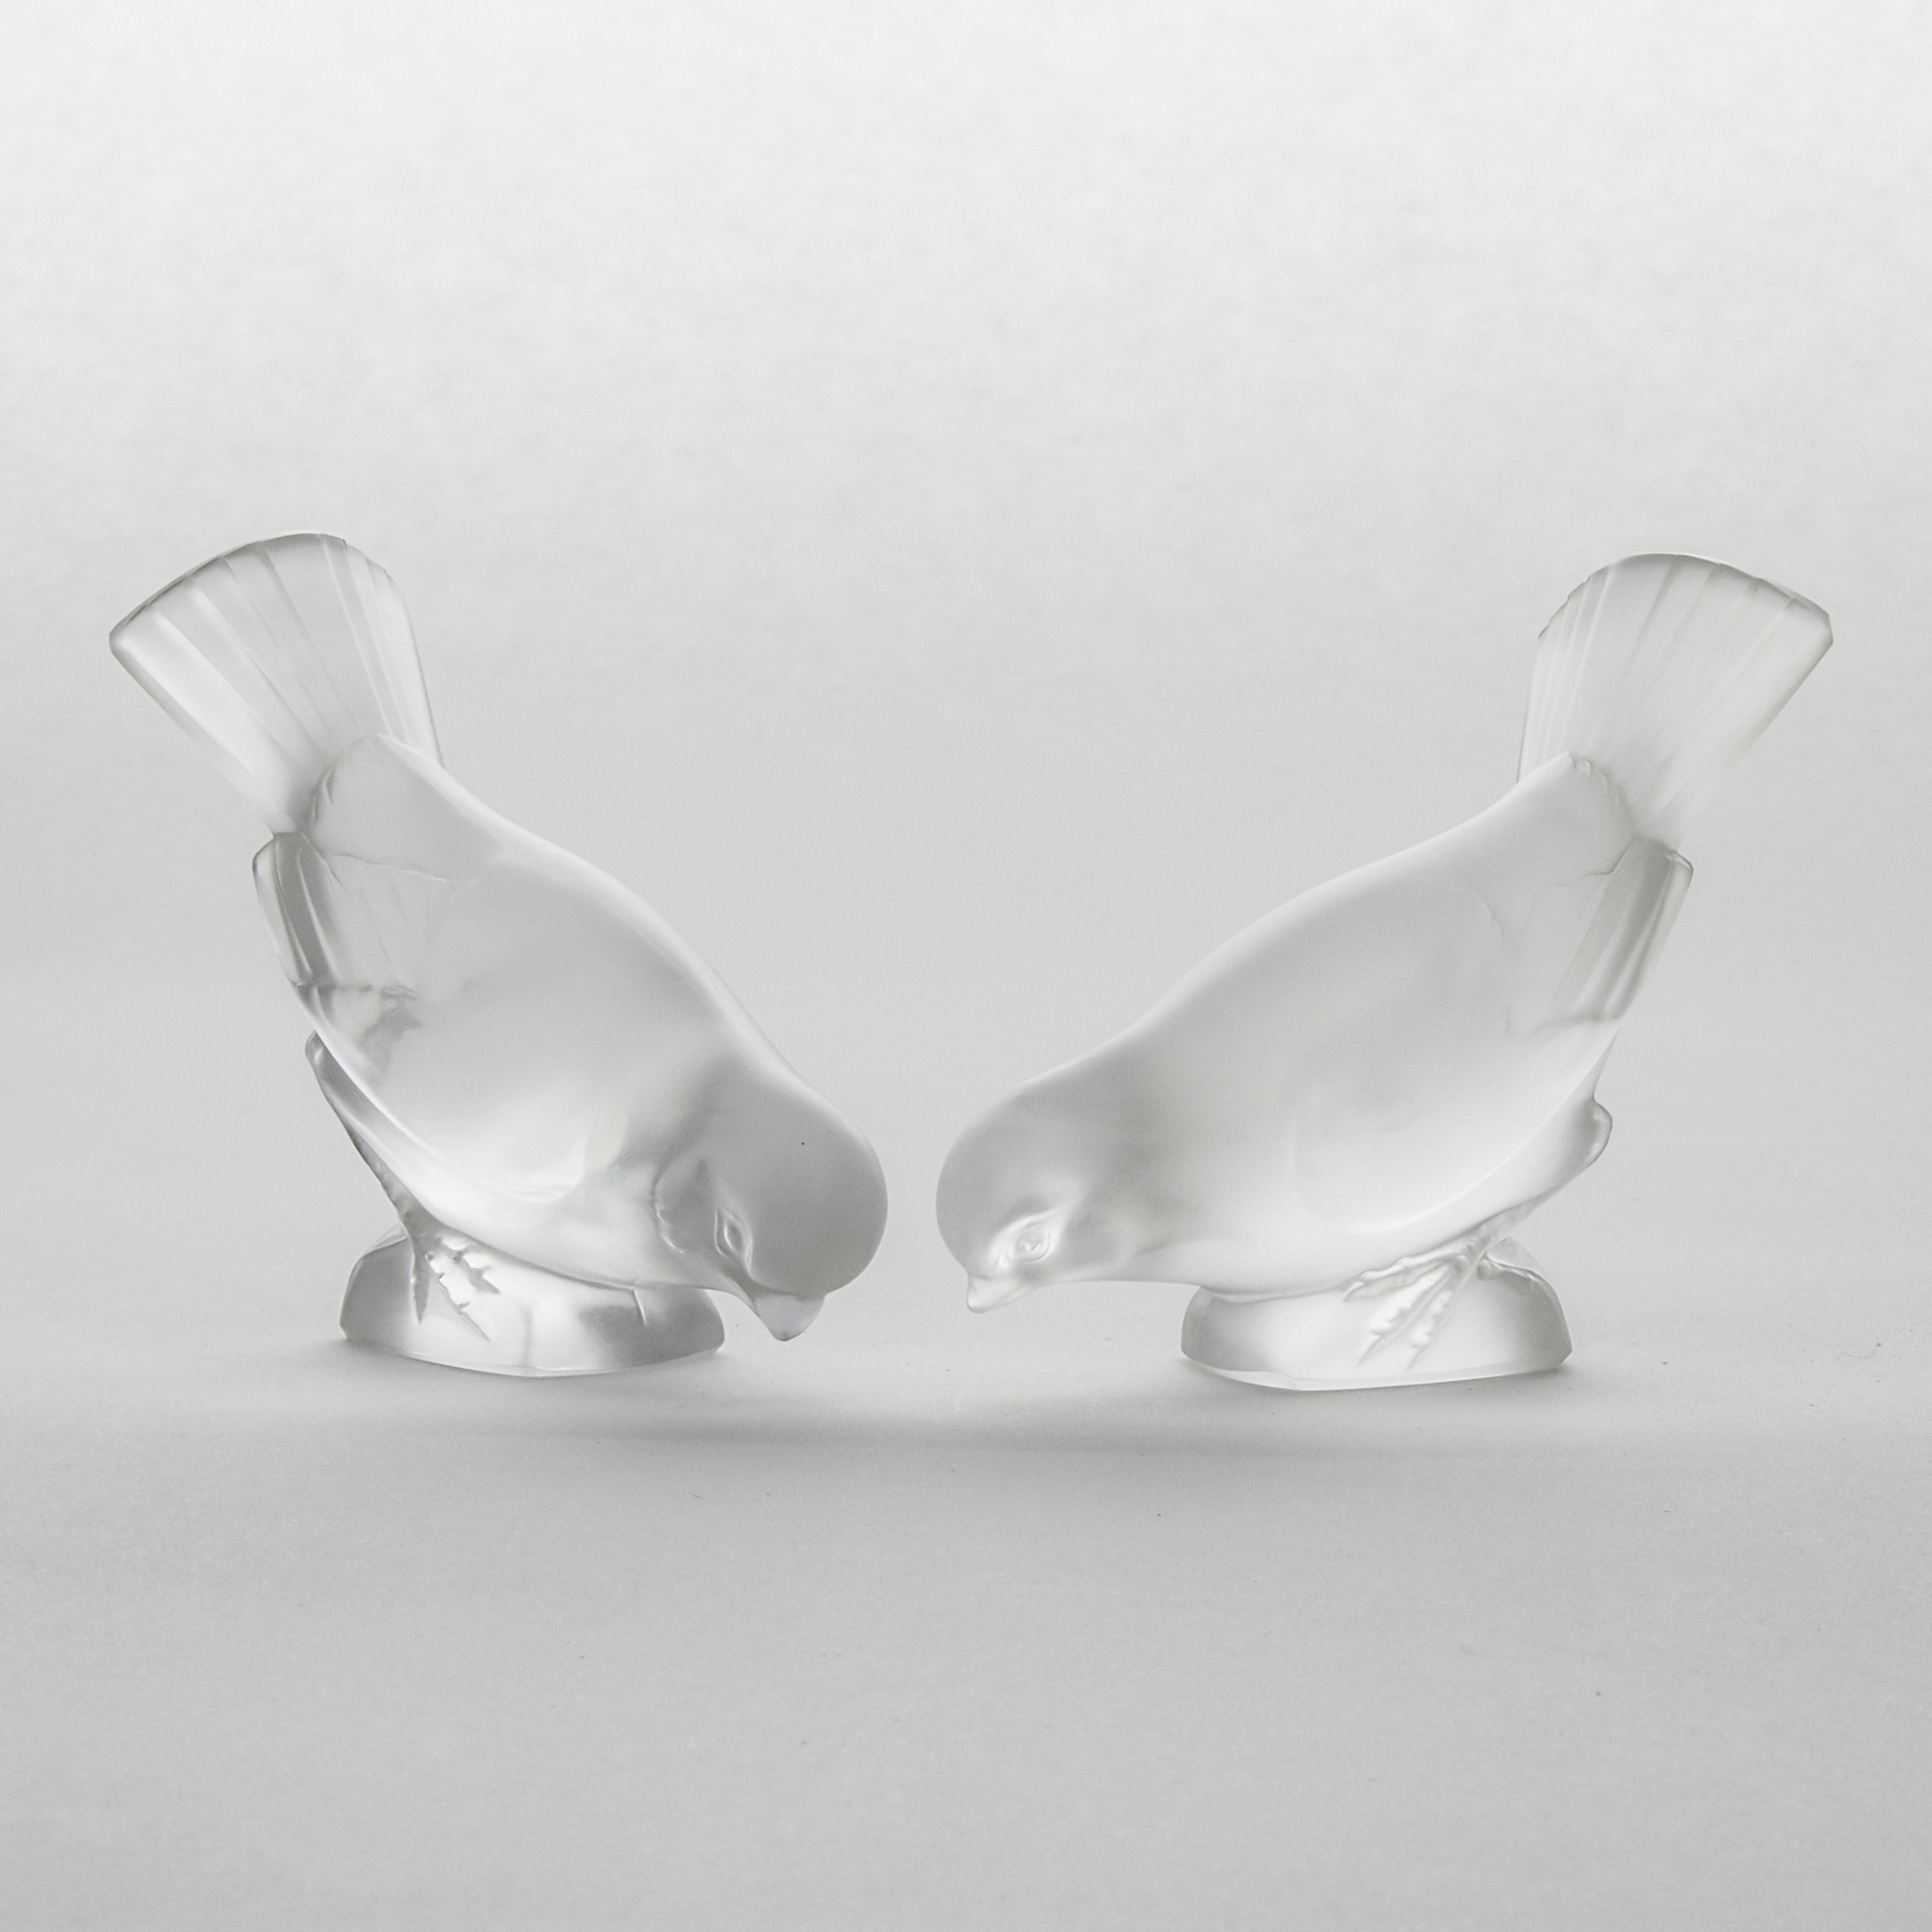 ‘Moineaux’, Two Lalique Moulded and Frosted Glass Birds, post-1945